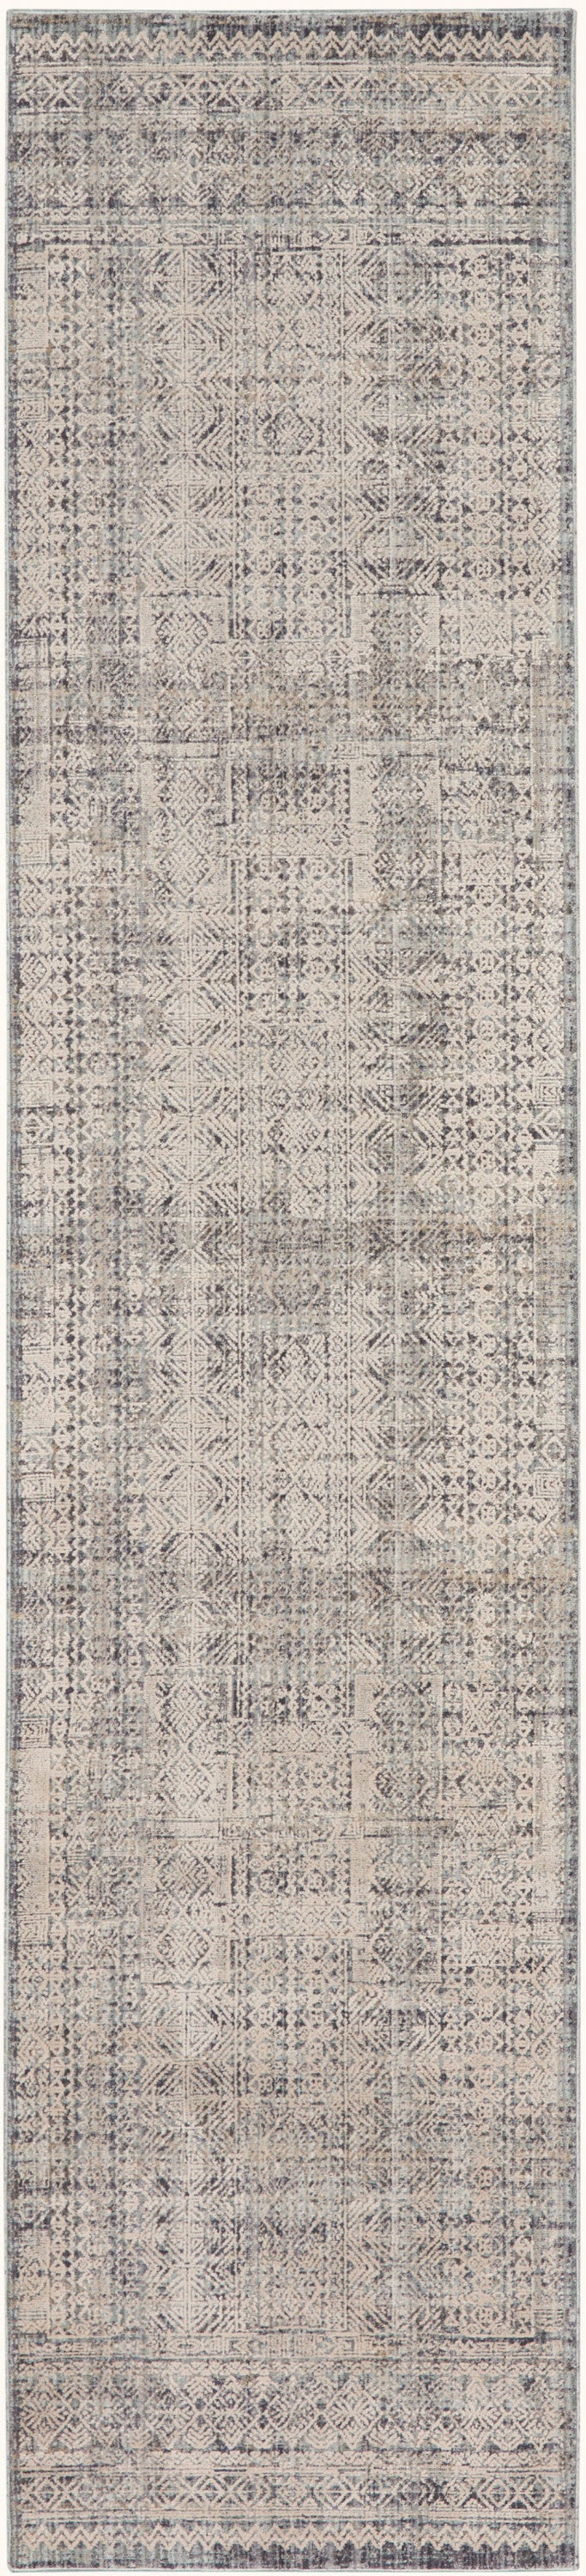 Nourison Home Lynx LNX06 Ivory Blue Transitional Machinemade Rug